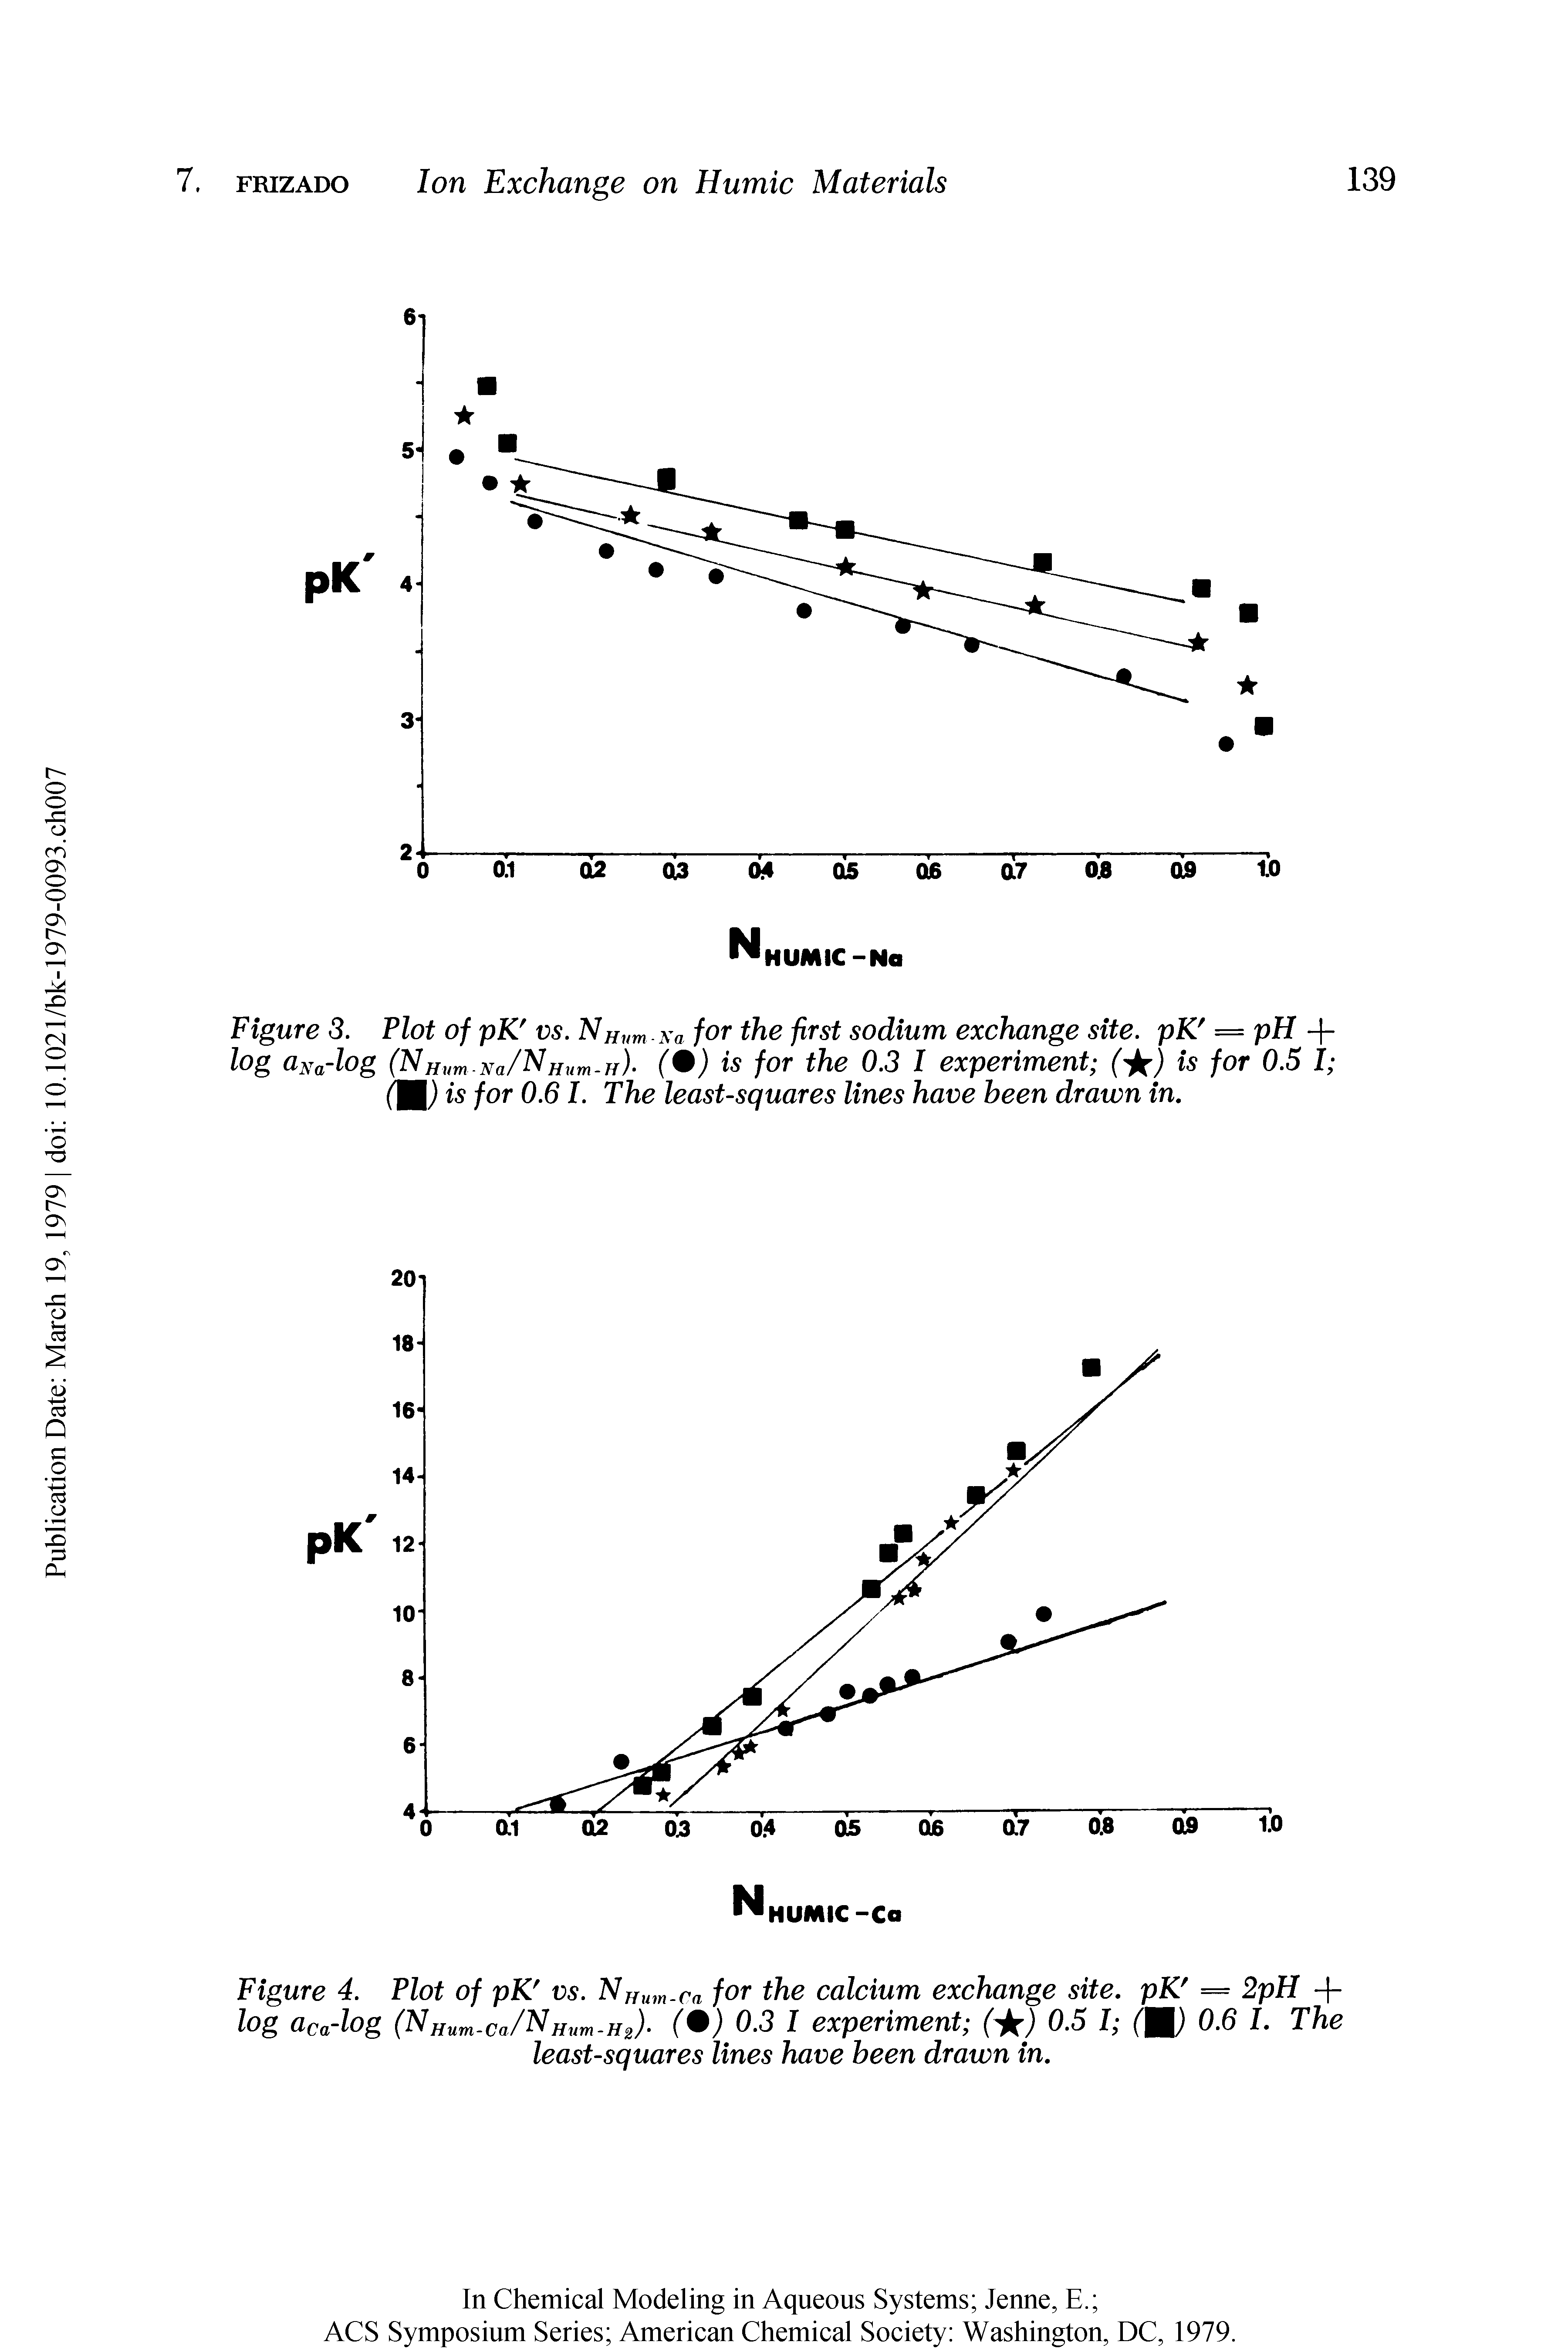 Figure 3. Plot of pK vs. NHum xa for the first sodium exchange site. pKI = pH + log a r -log (NHum-Na/HHum-Hh for thc 0.3 I experiment (i ) is for 0.5 I (M) is for 0.61. The least-squares lines have been drawn in.